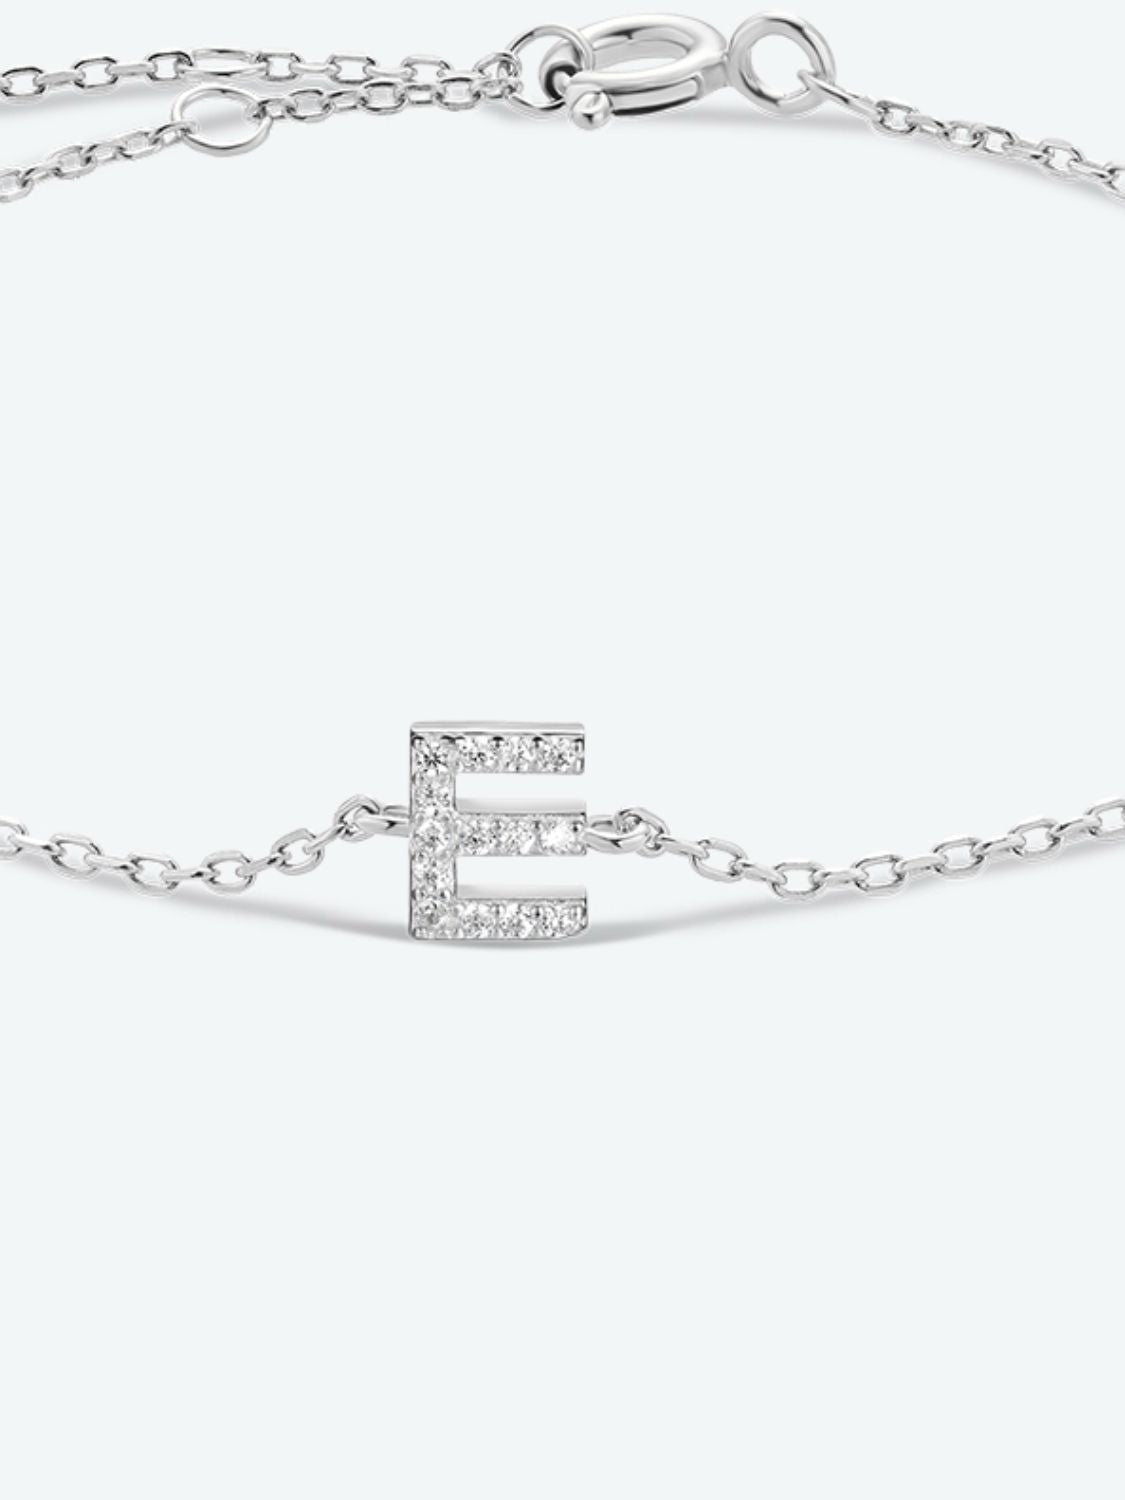 Uylees Boutique A To F Zircon 925 Sterling Silver Bracelet